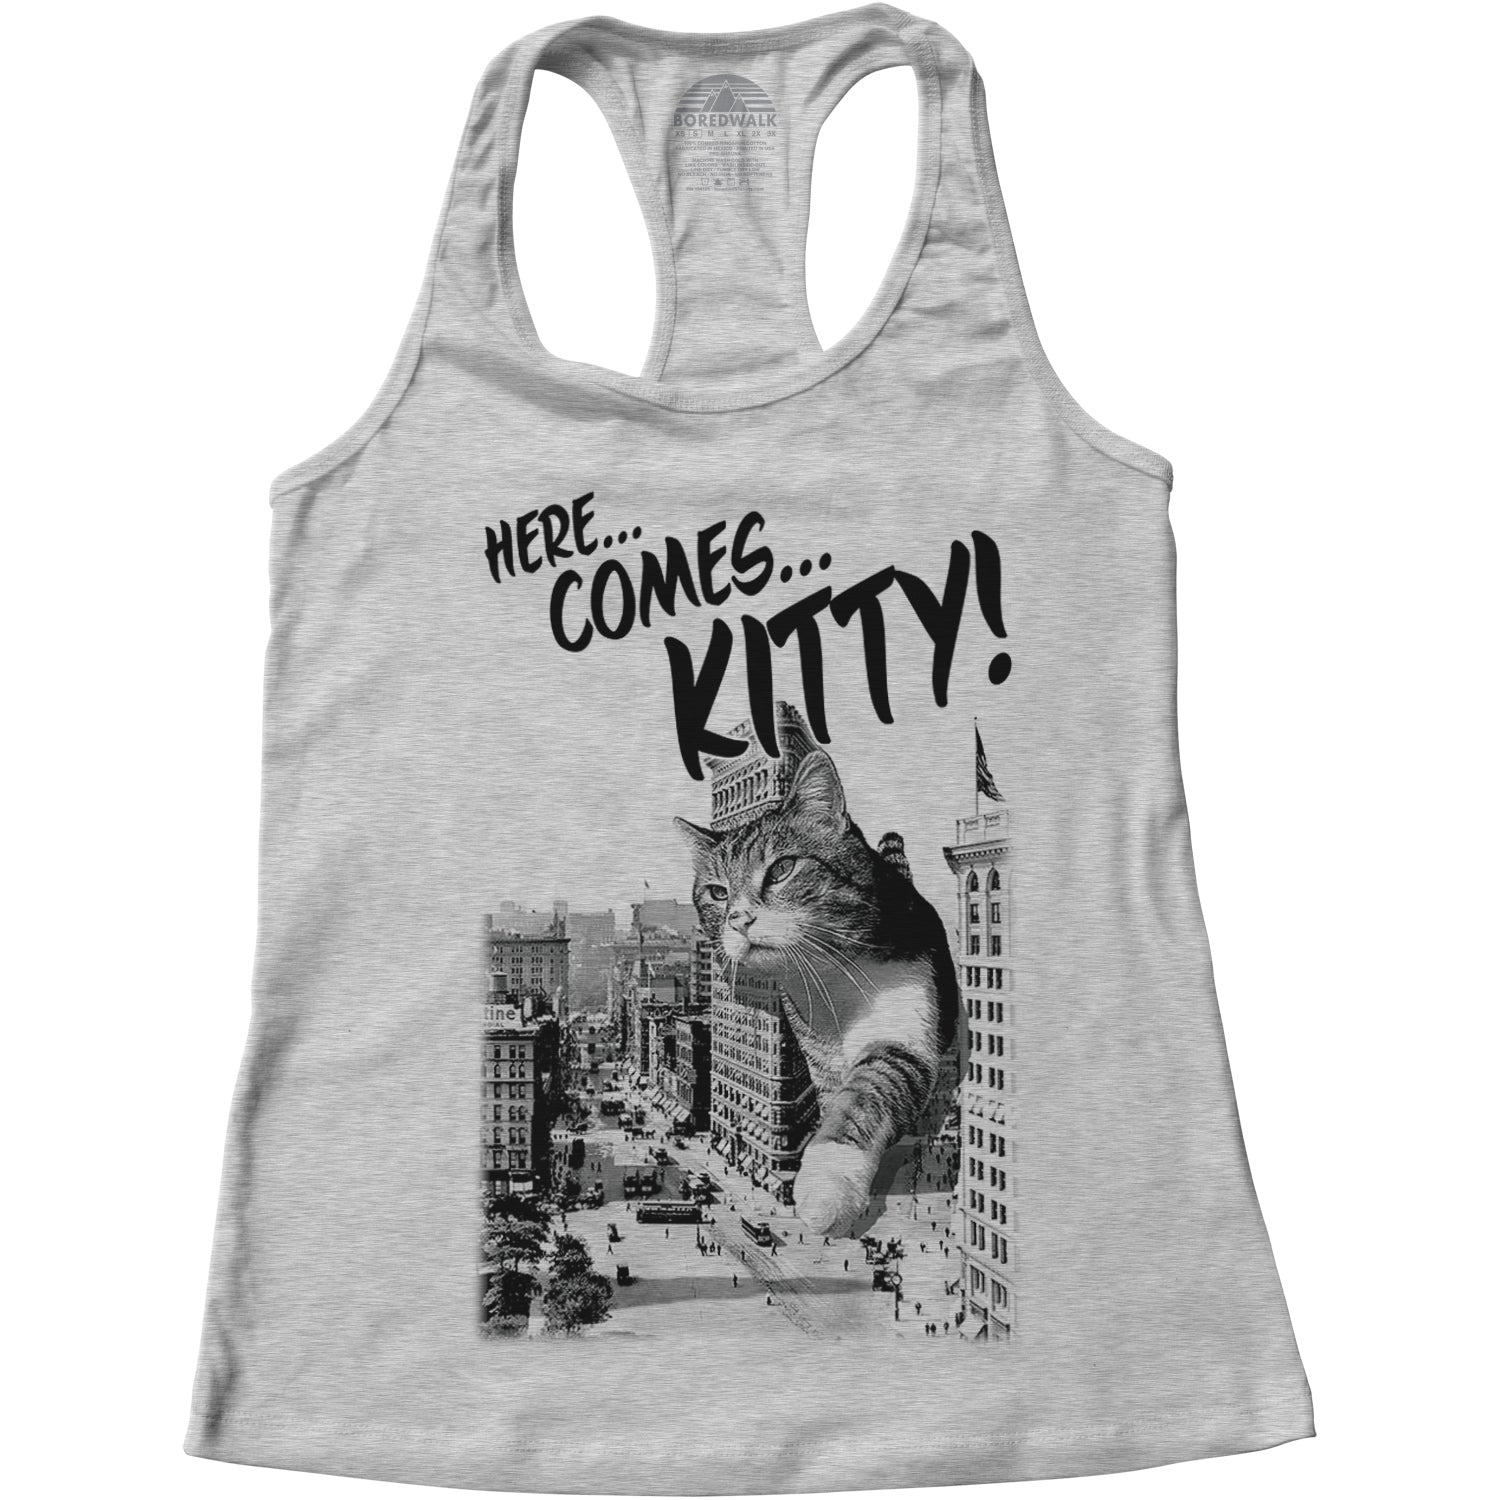 Women's Here Comes Kitty Racerback Tank Top